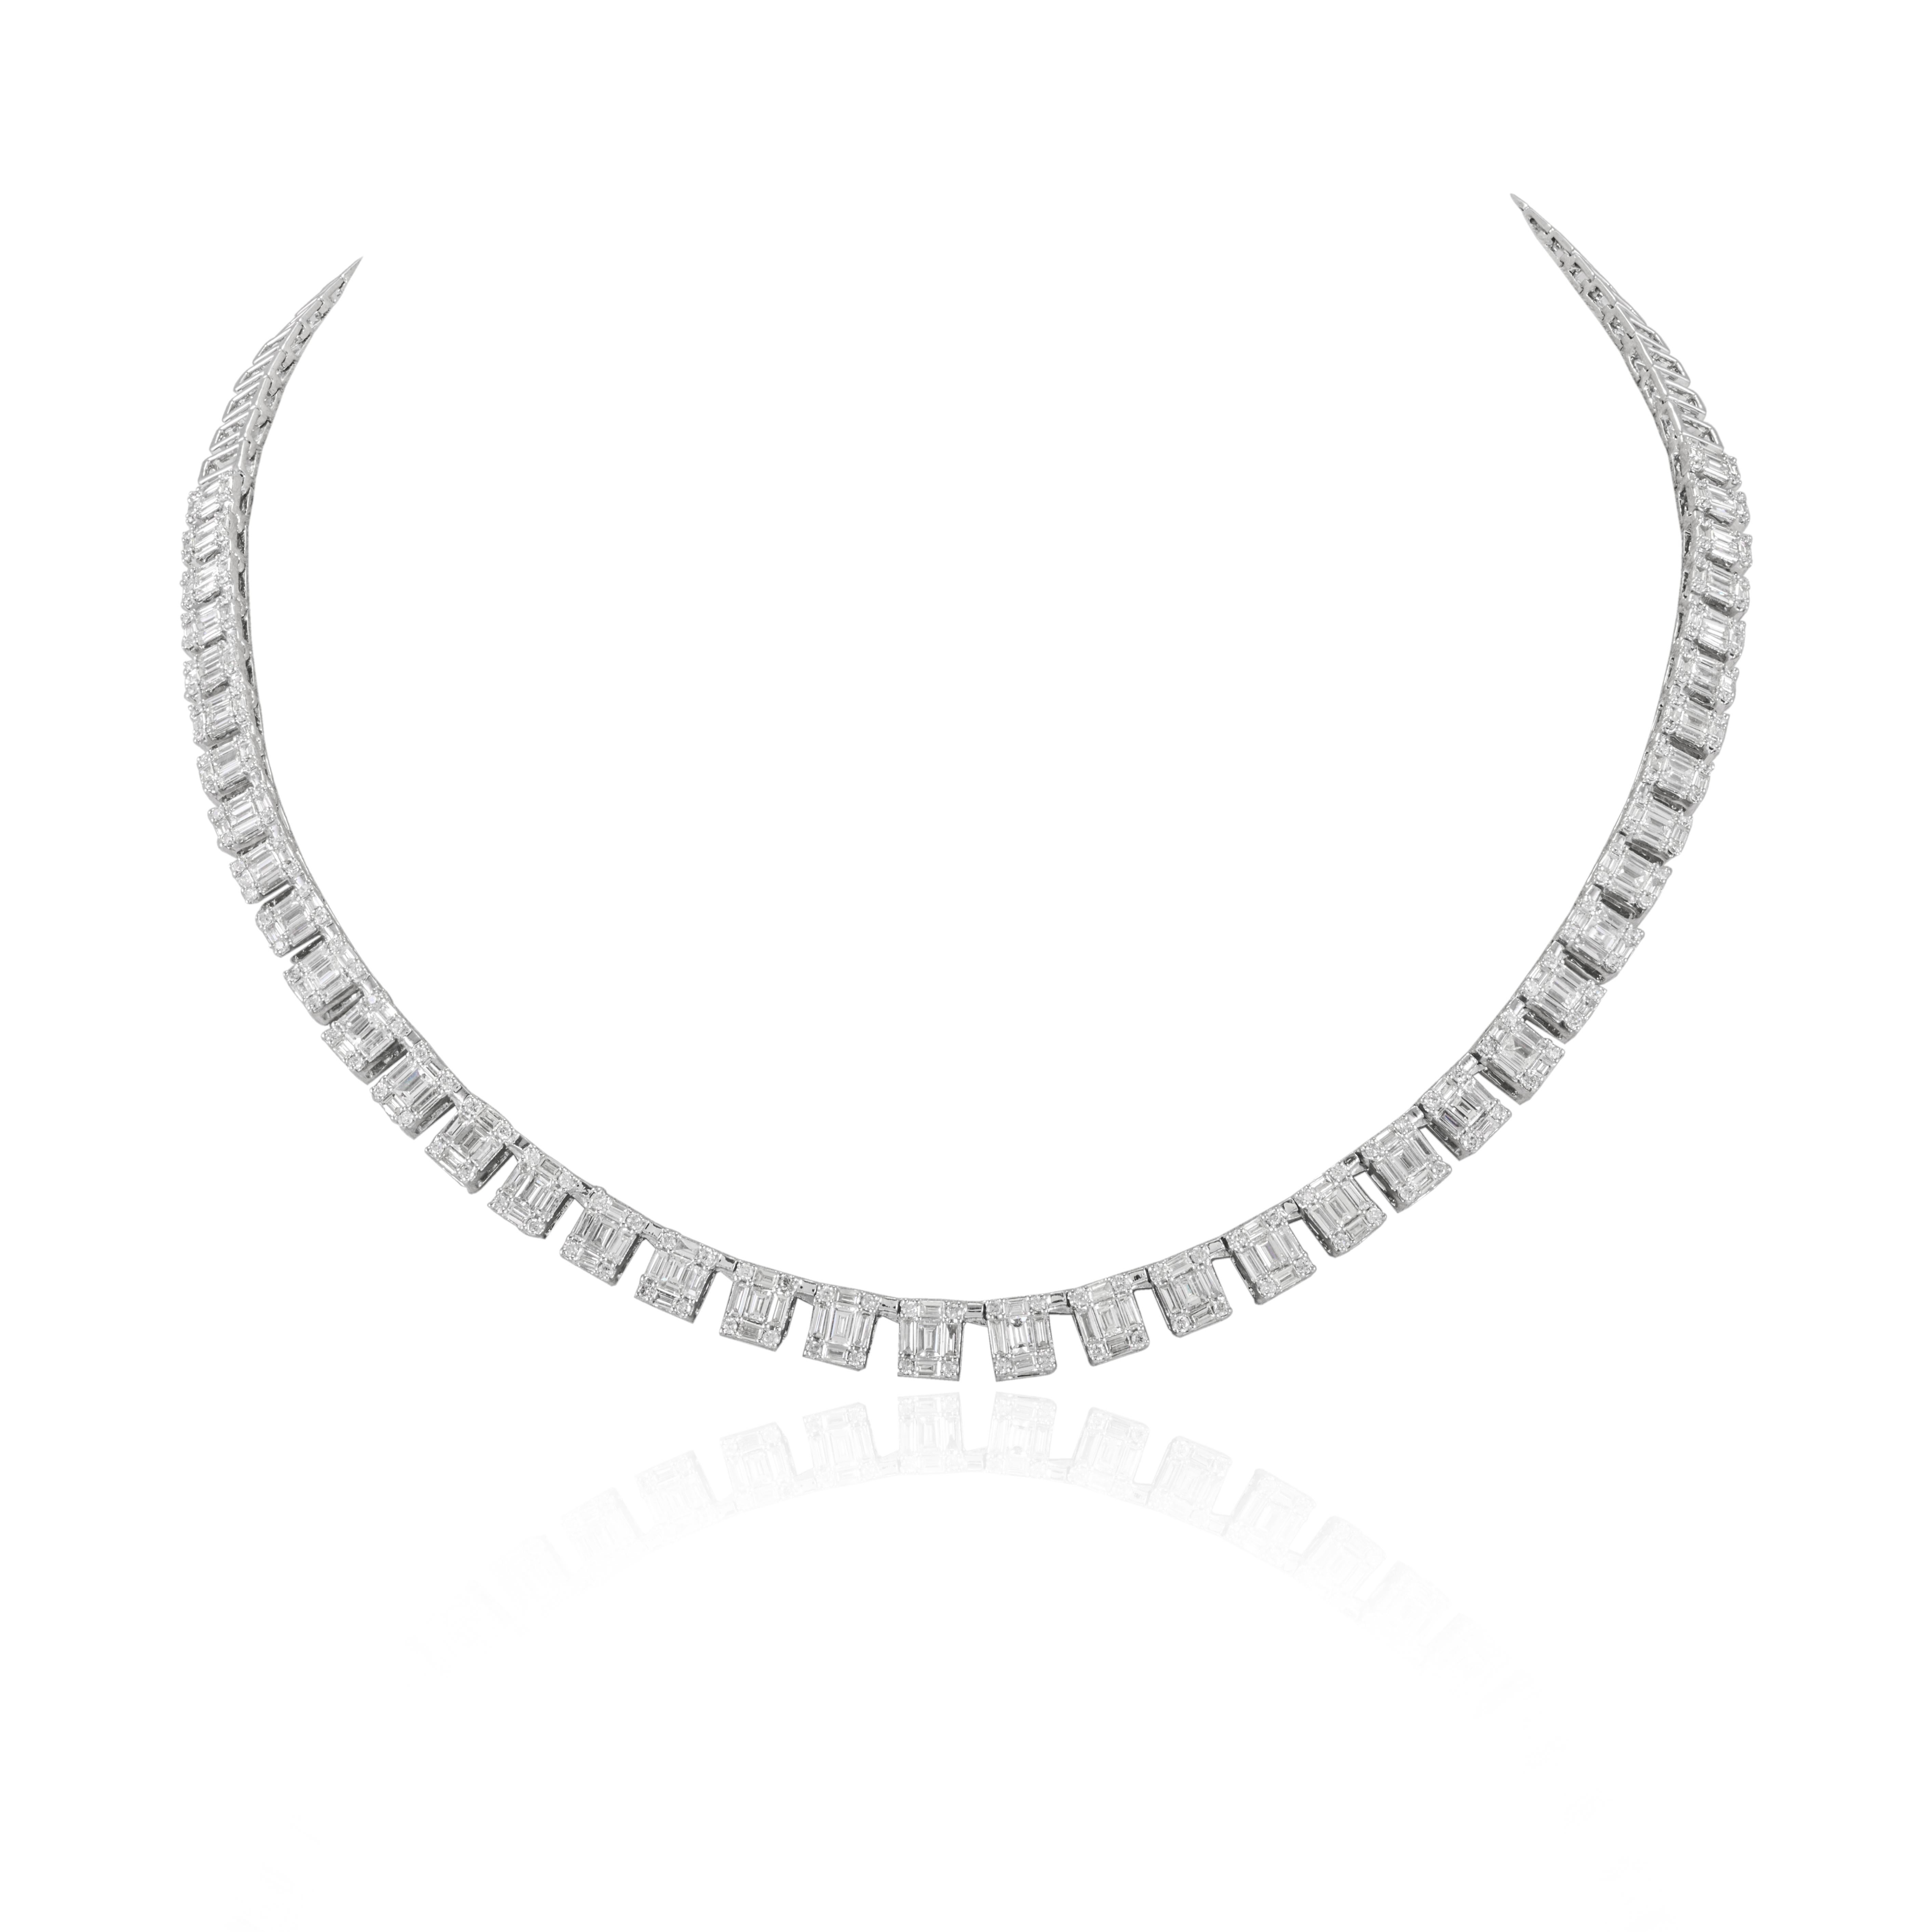 3.7 CTW Emerald Cut Illusion Set Diamond Tennis Necklace 18k Solid White Gold In New Condition For Sale In Houston, TX